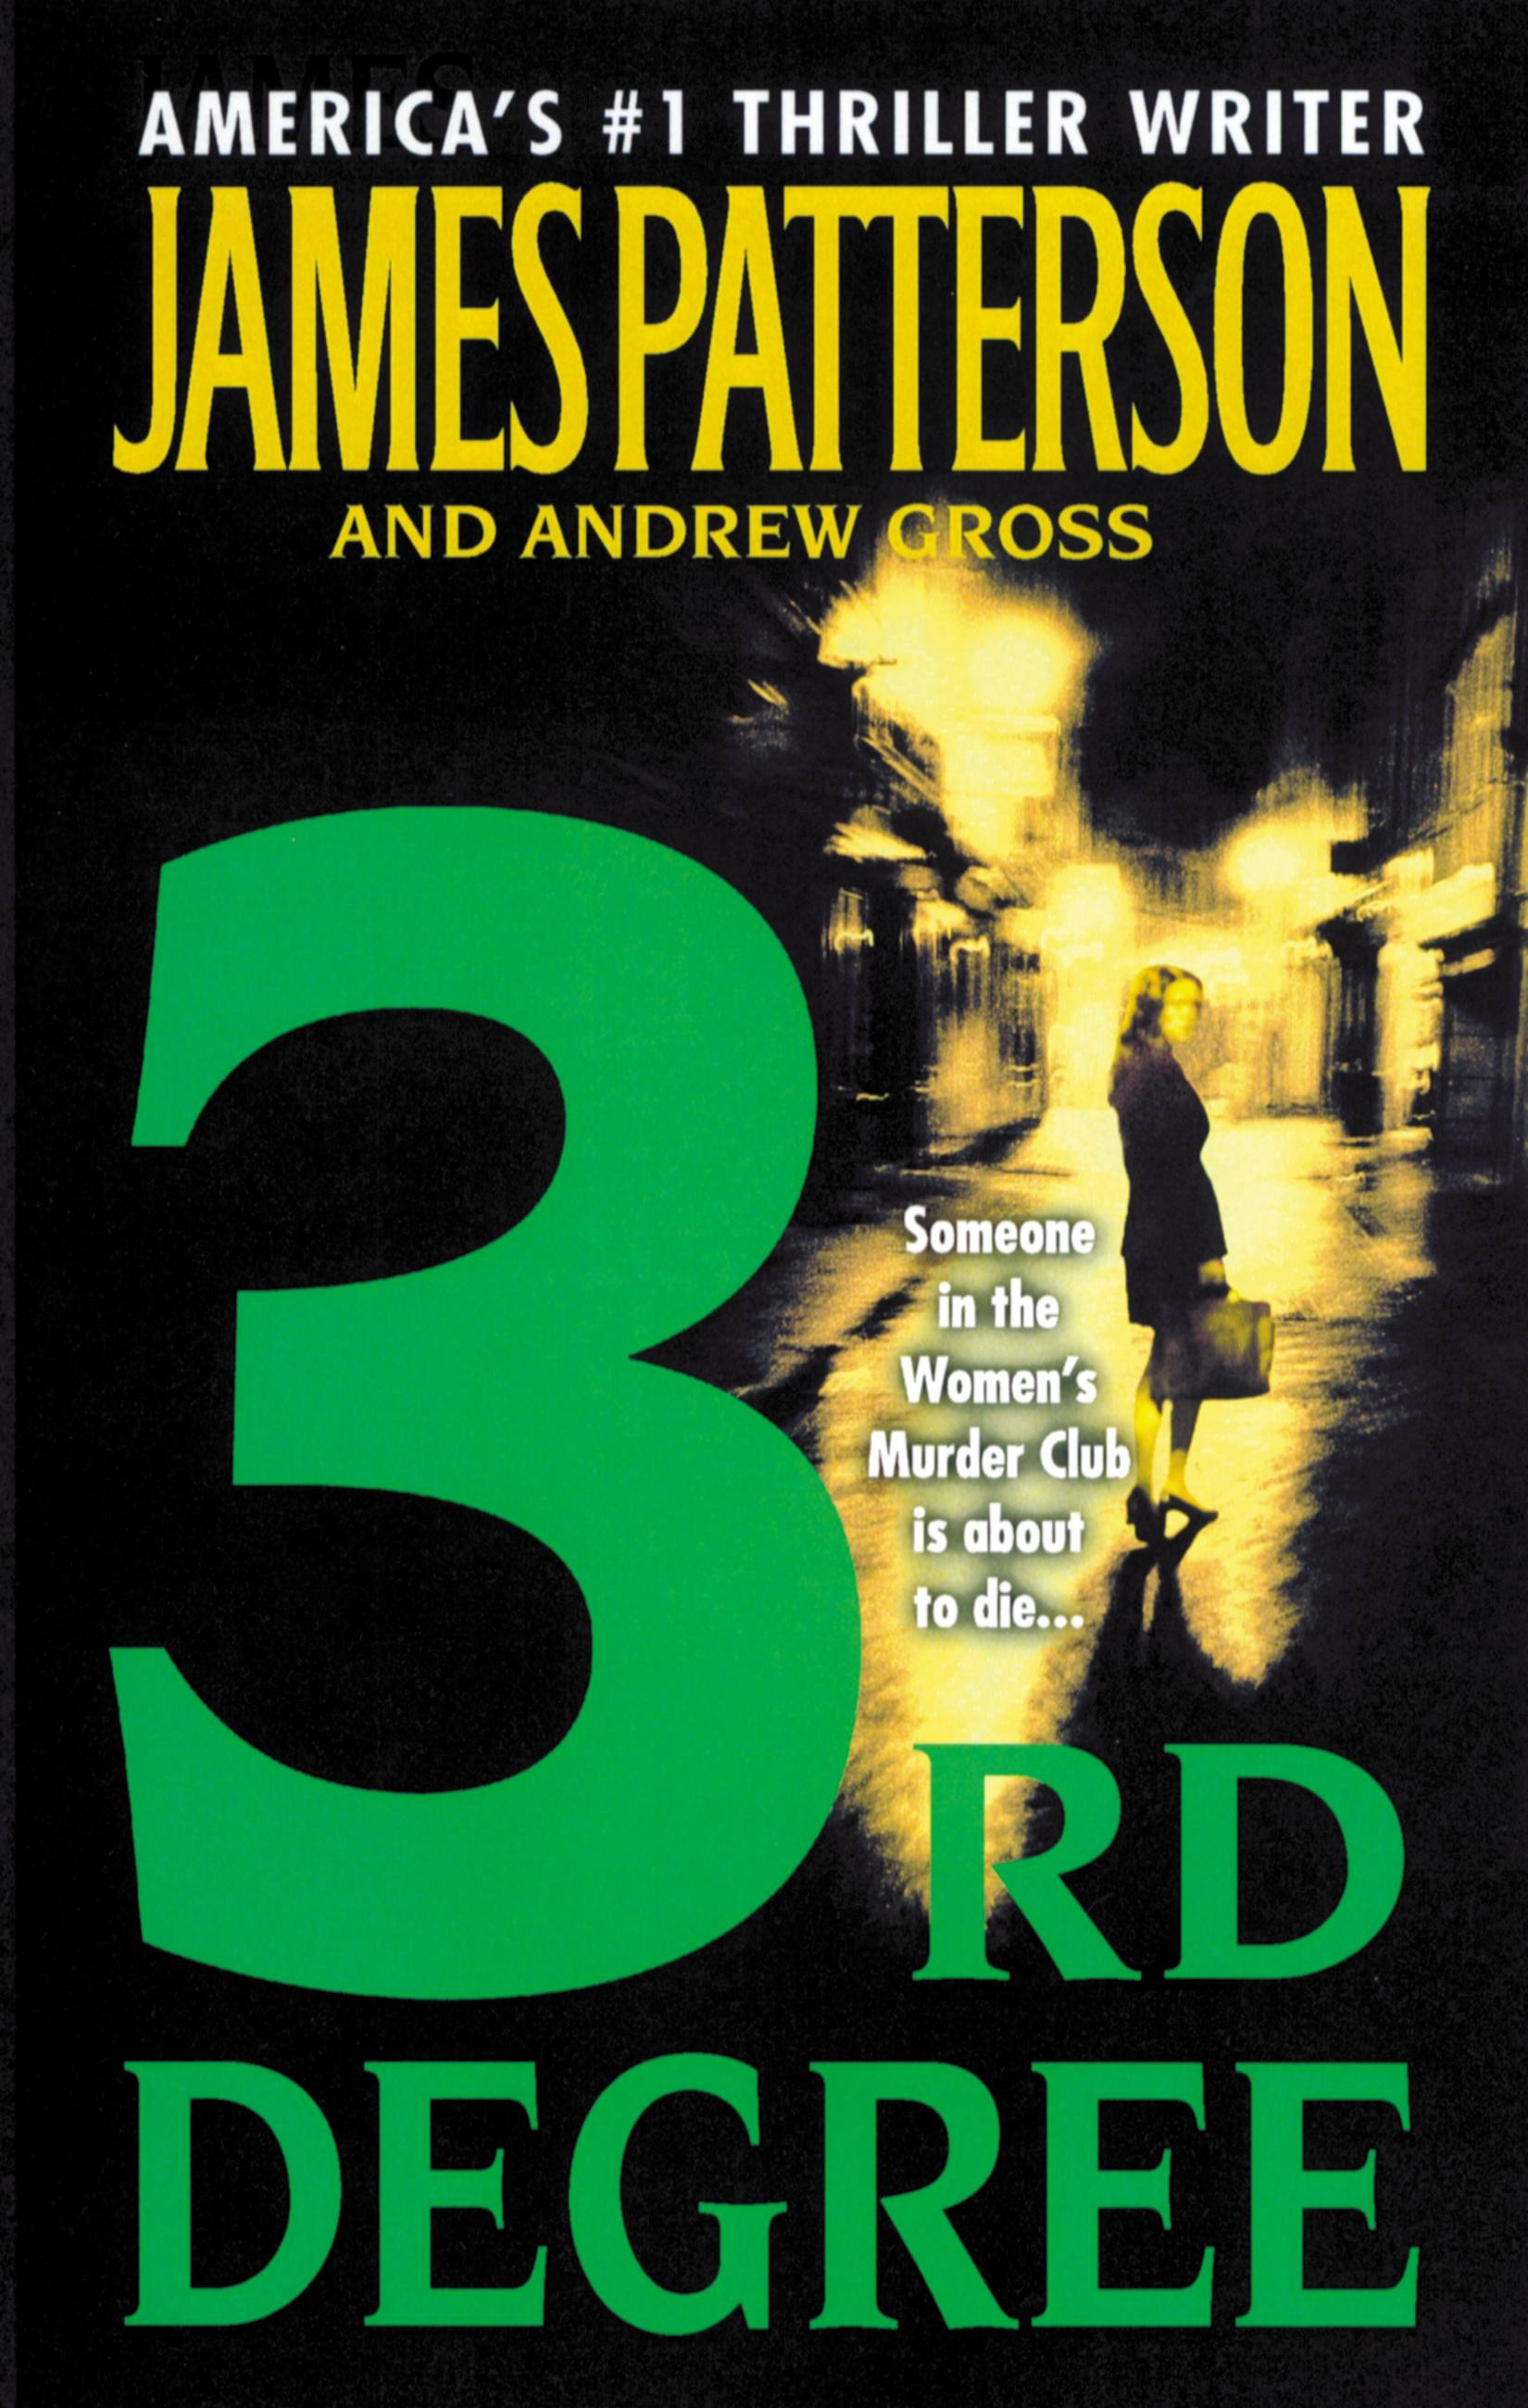 3rd Degree by James Patterson | Hachette Book Group